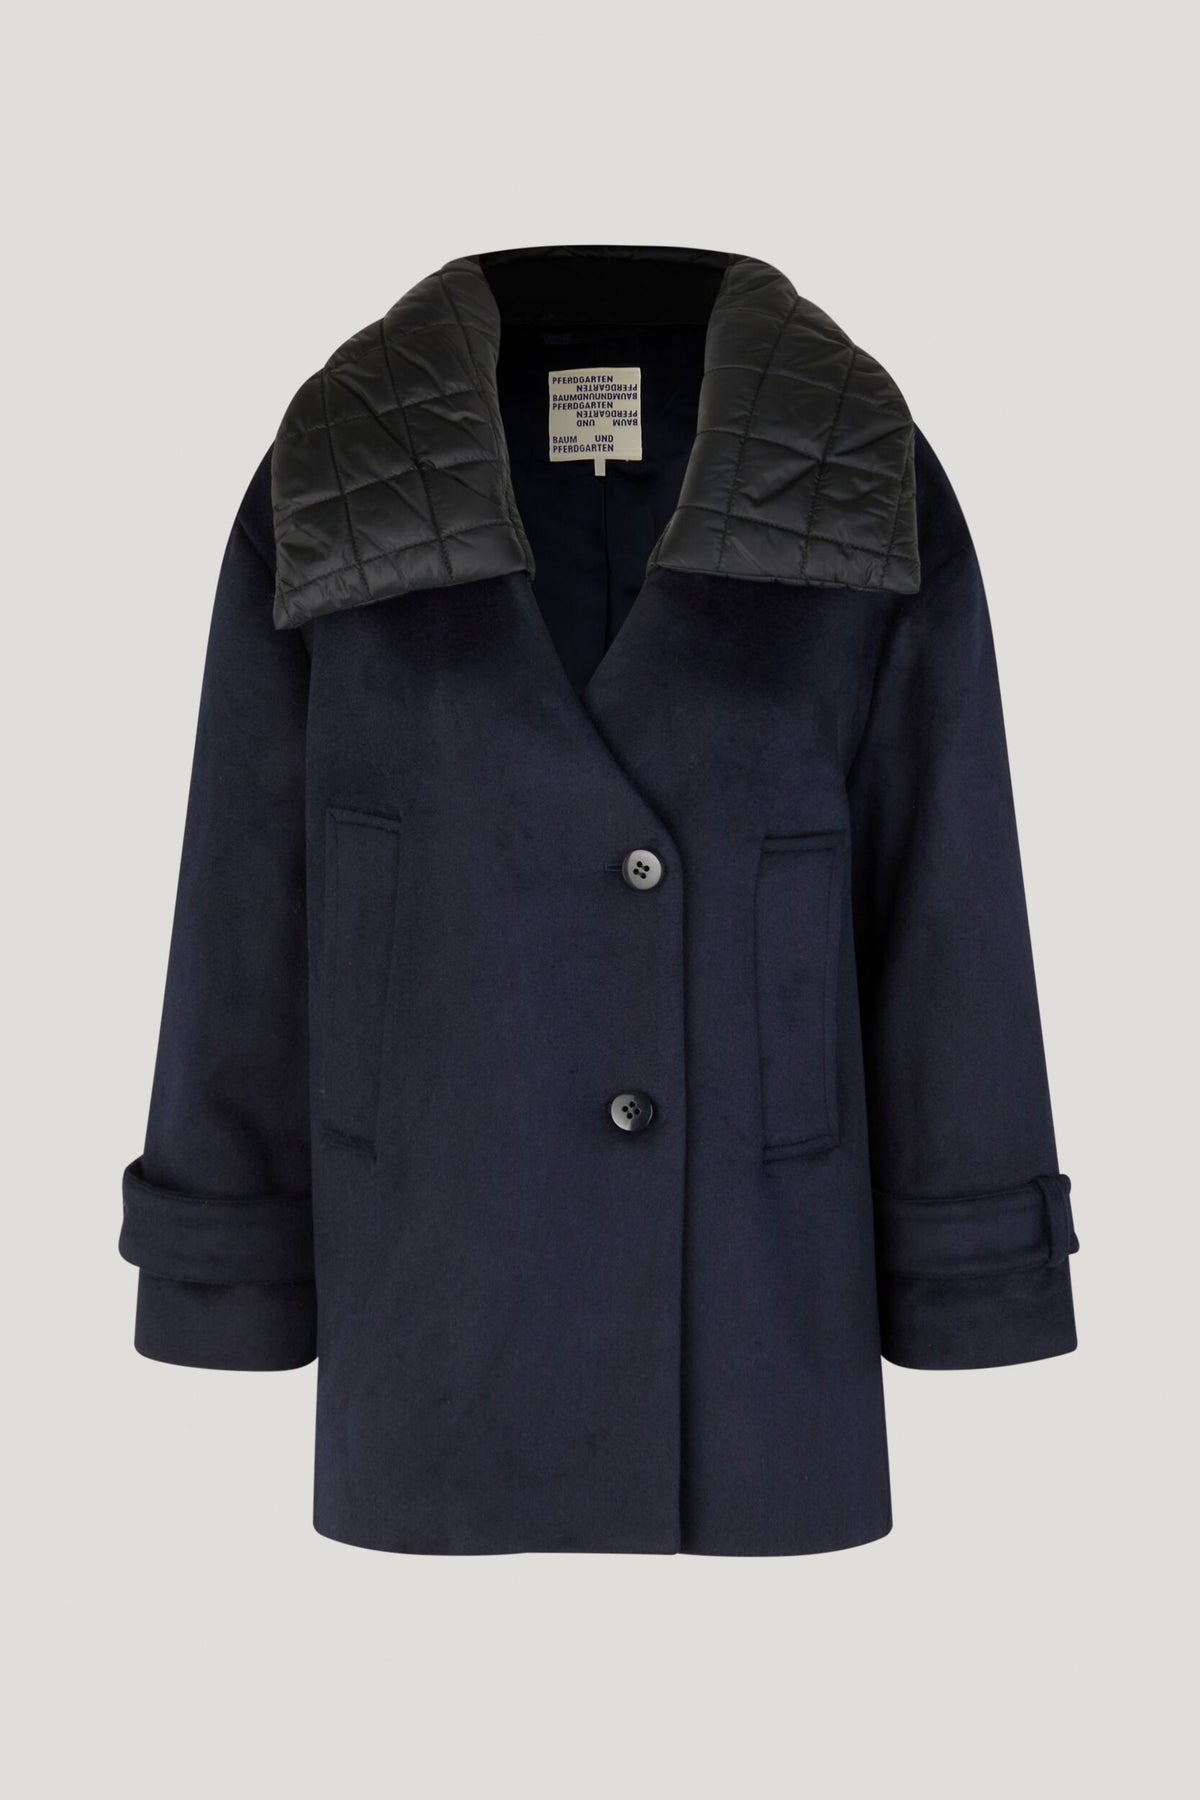 Navy pea coat single breasted with two welt side pockets and detachable black padded and quilted collar